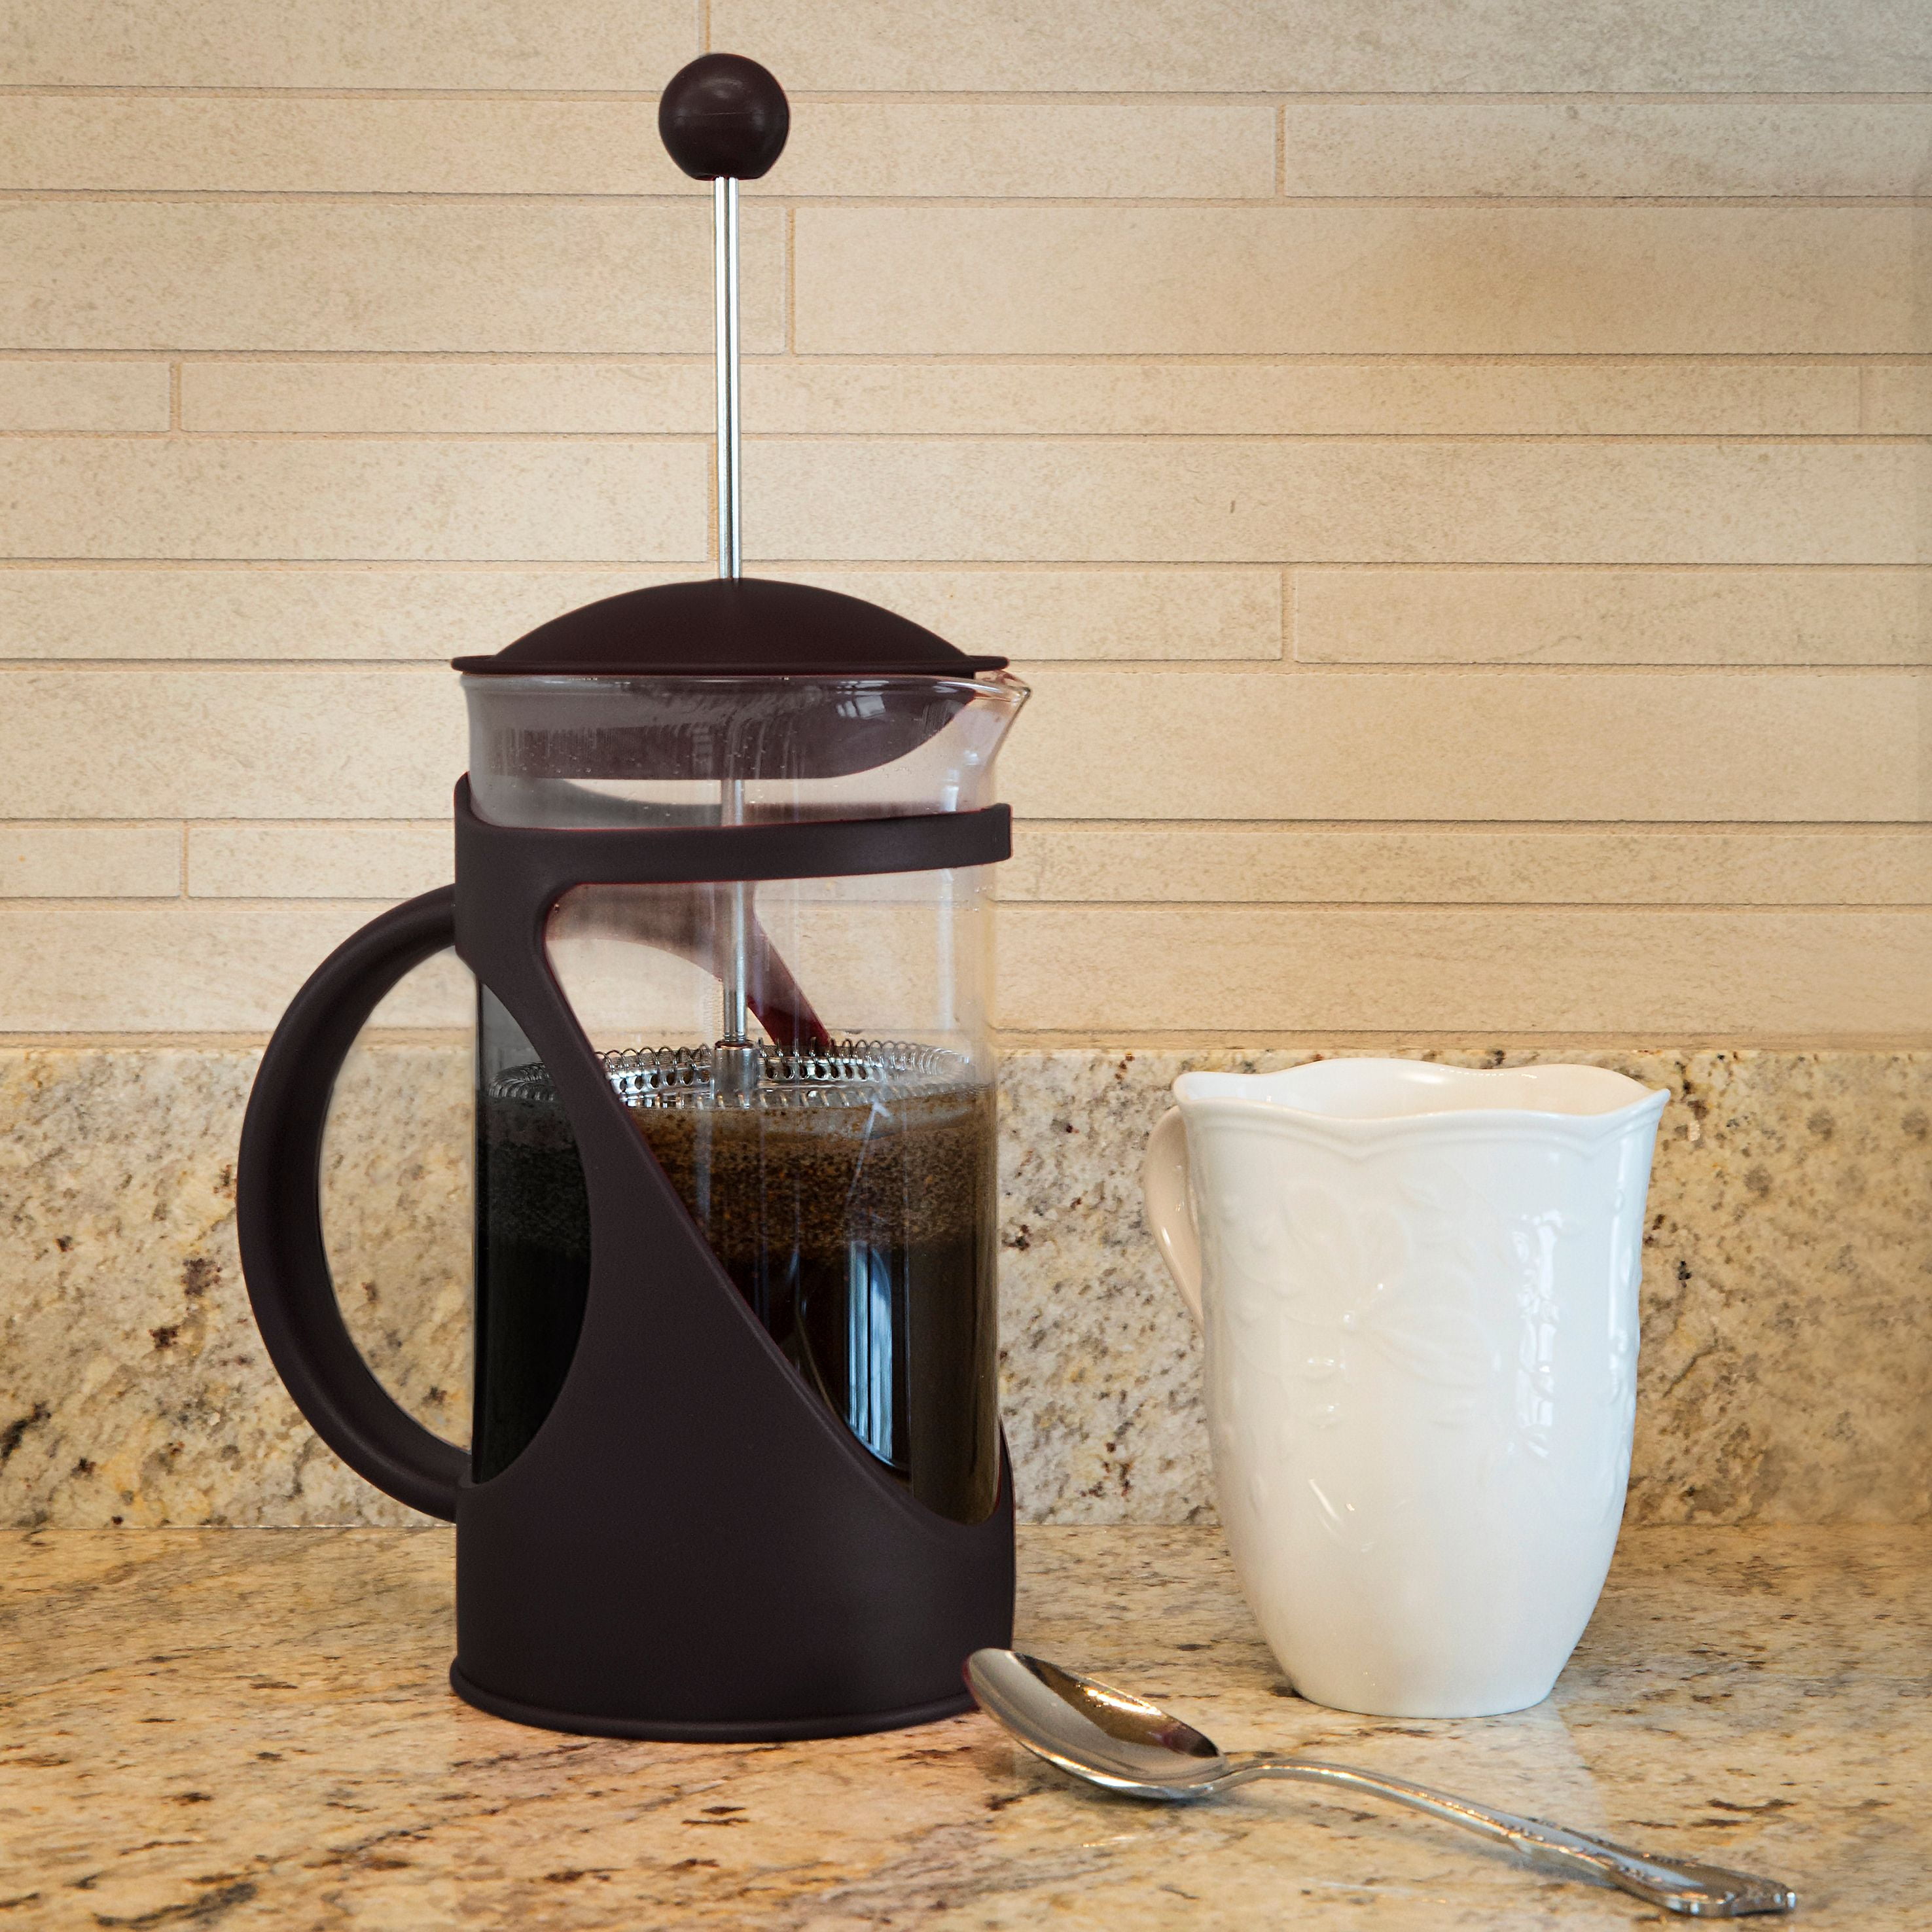 French Press, large - arabia brown